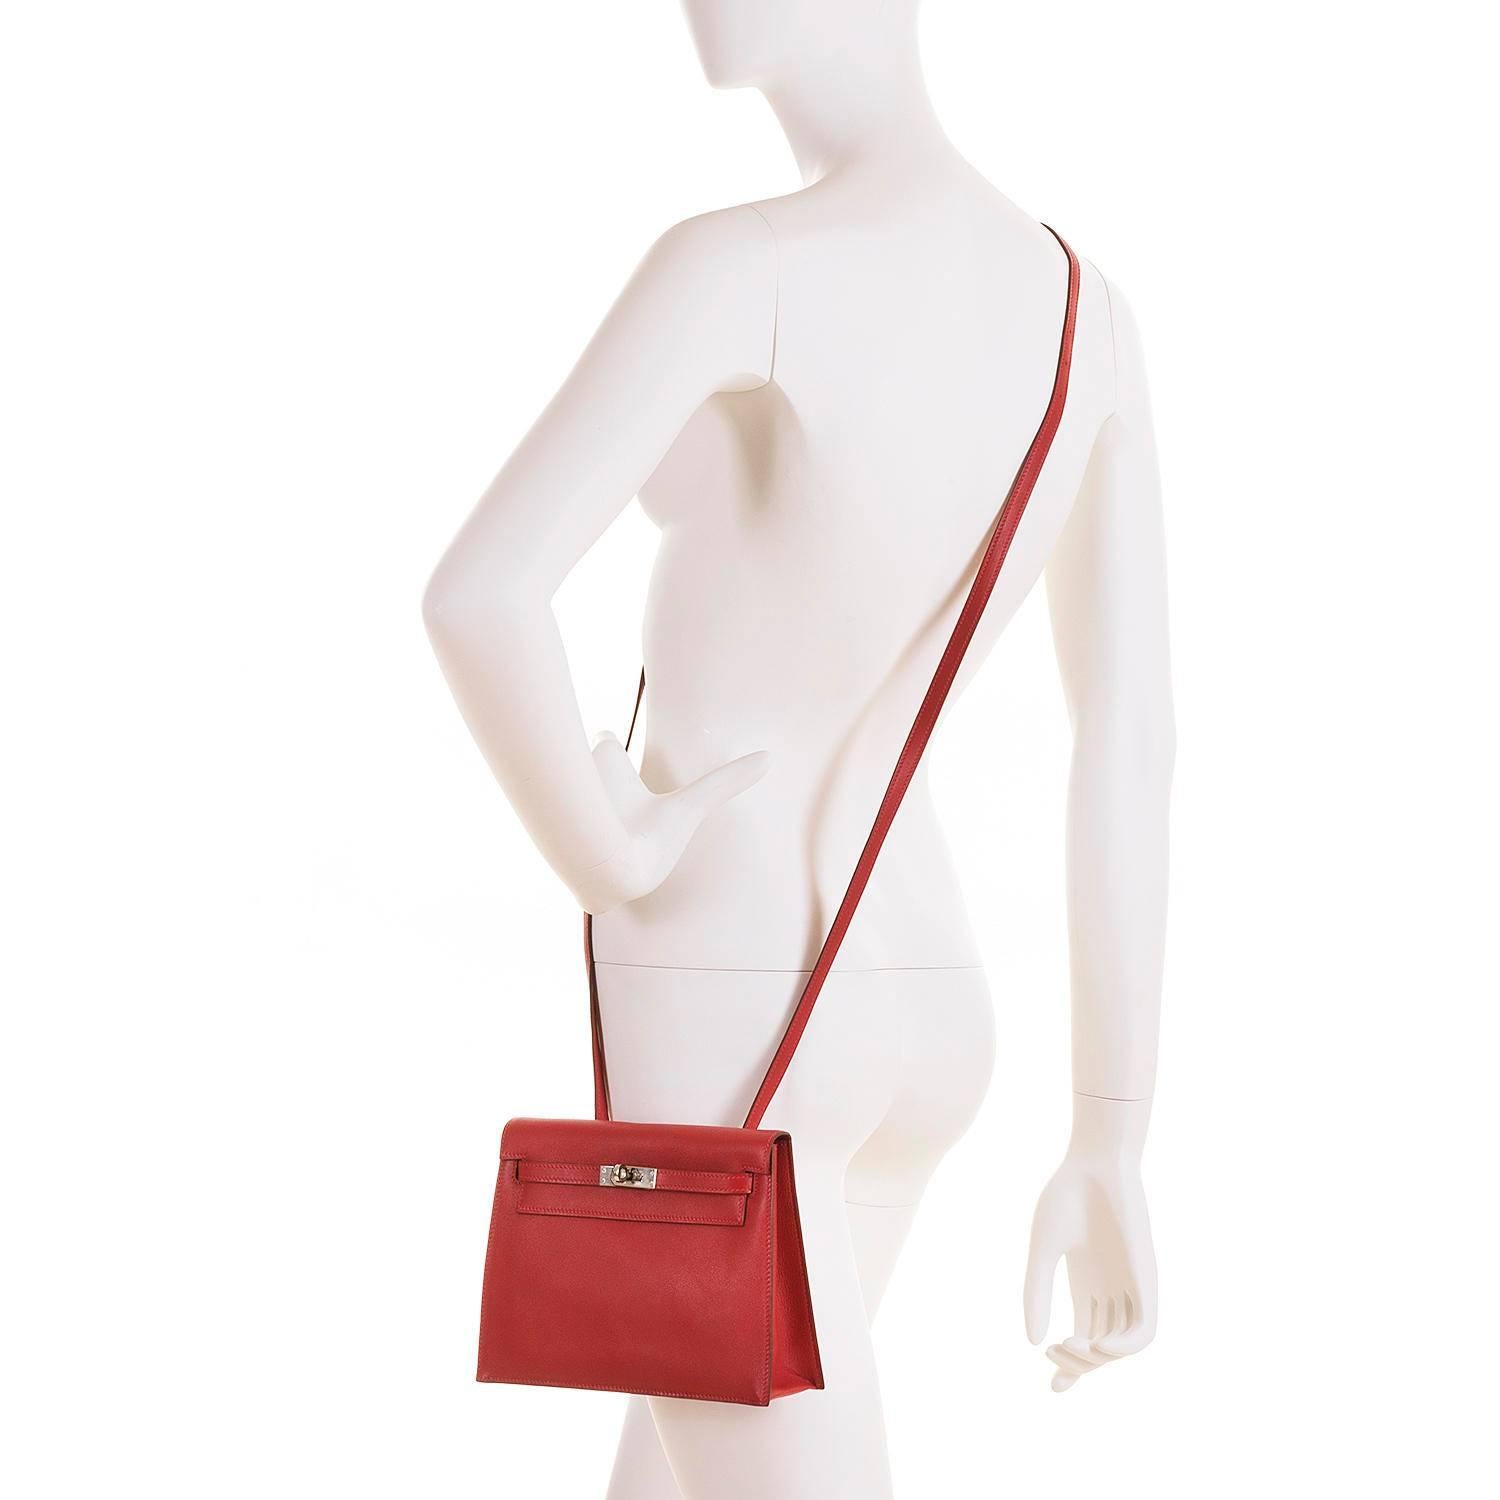 RARE & PRISTINE Hermes Danse Kelly Bag in Swift Leather with Palladium Hardware For Sale 5